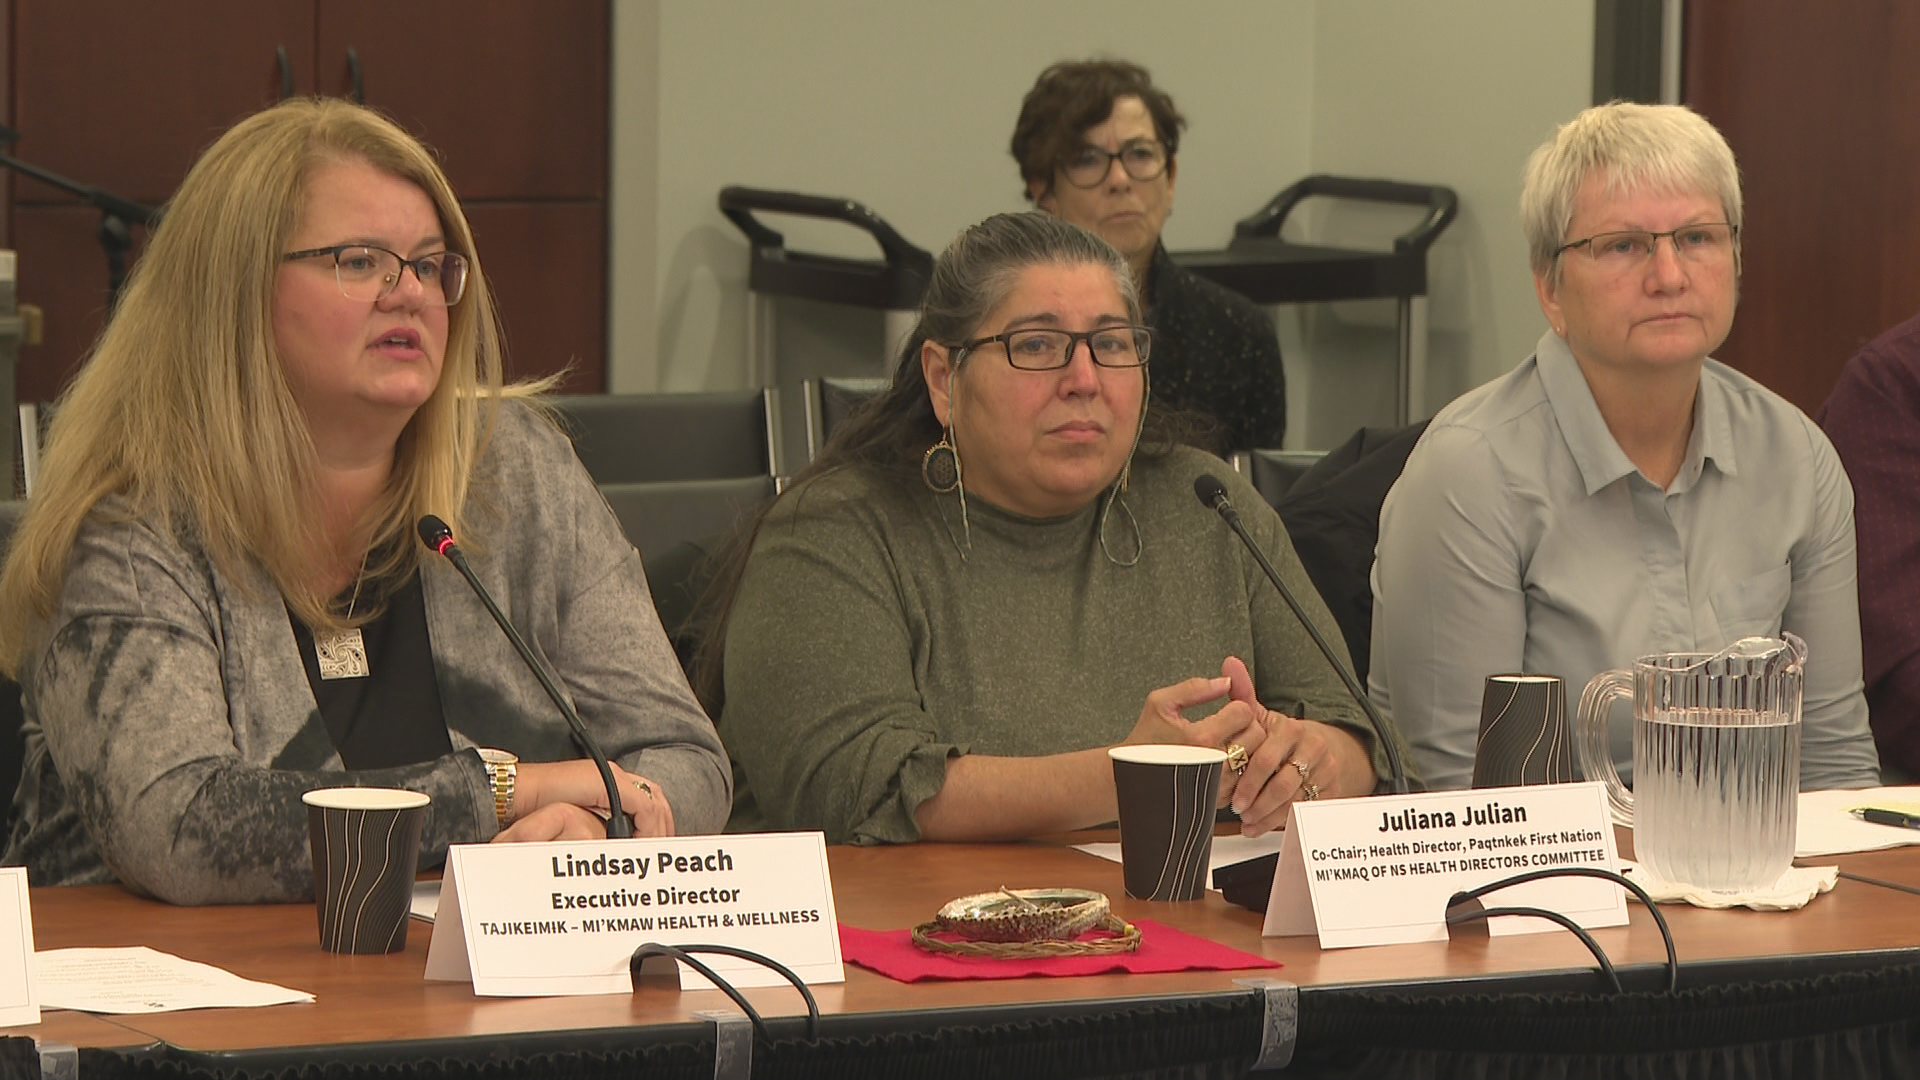 ‘It’s not working’: Calls for better mental health support for N.S. First Nations communities